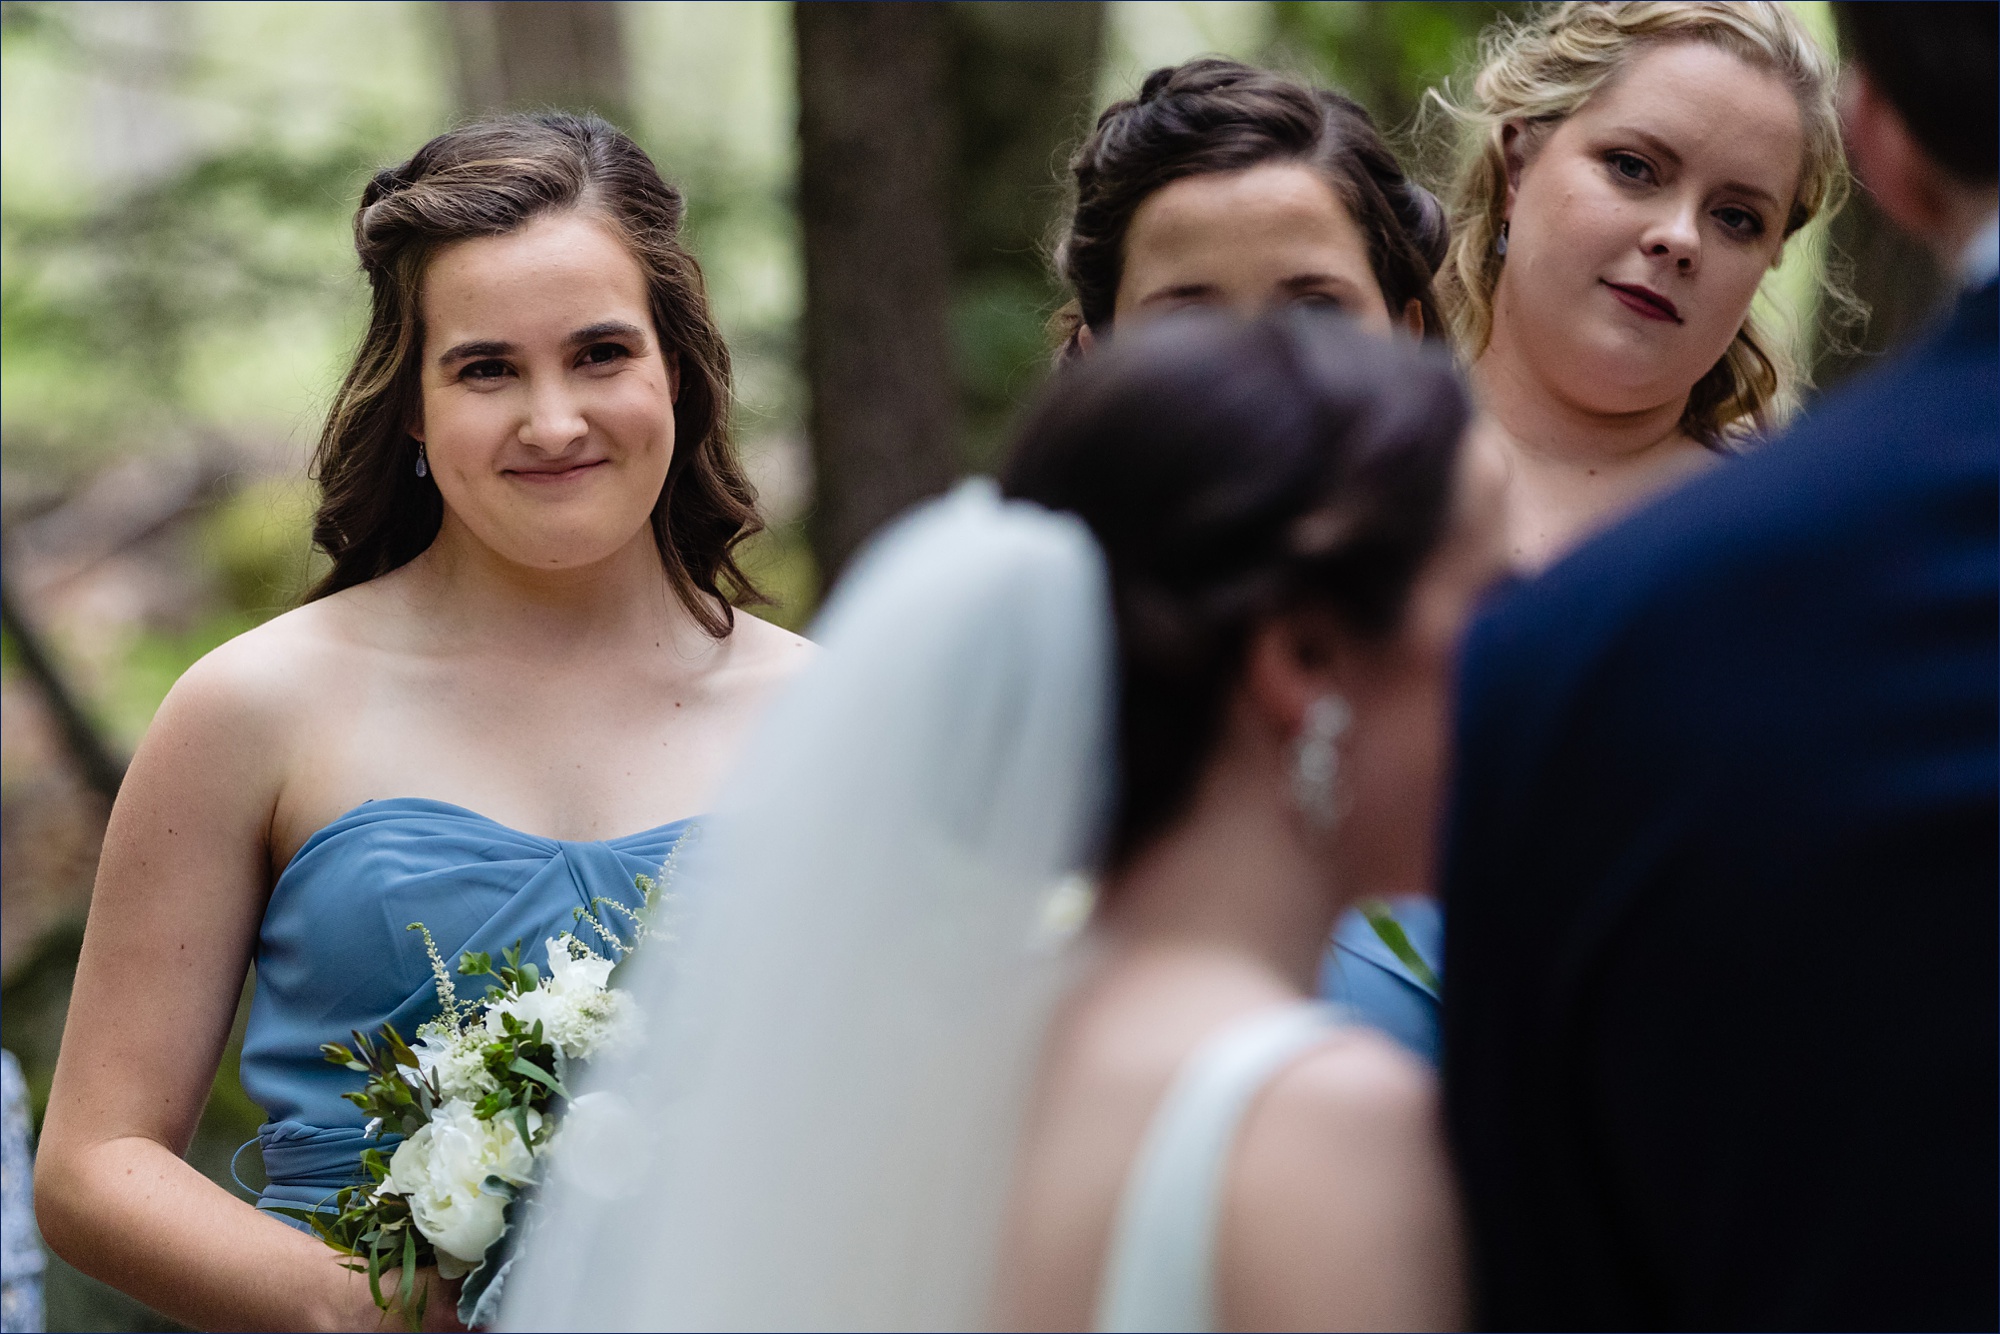 The bridesmaids smile at the couple during the outdoor Maine wedding ceremony